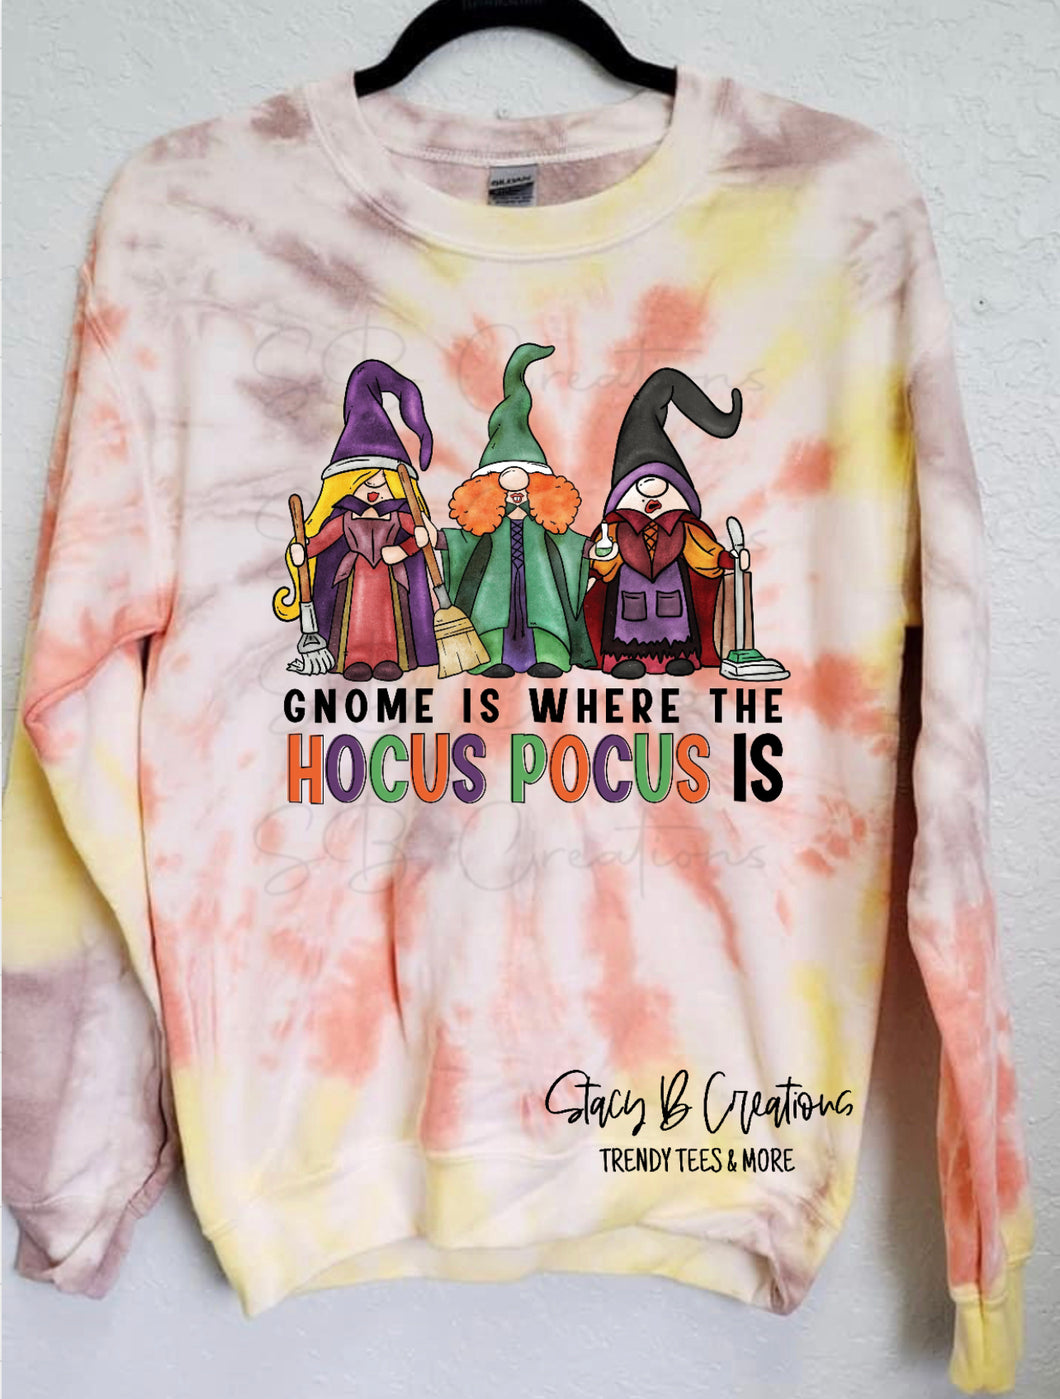 Gnome is where the hocus pocus is on “candy corn” tie dye